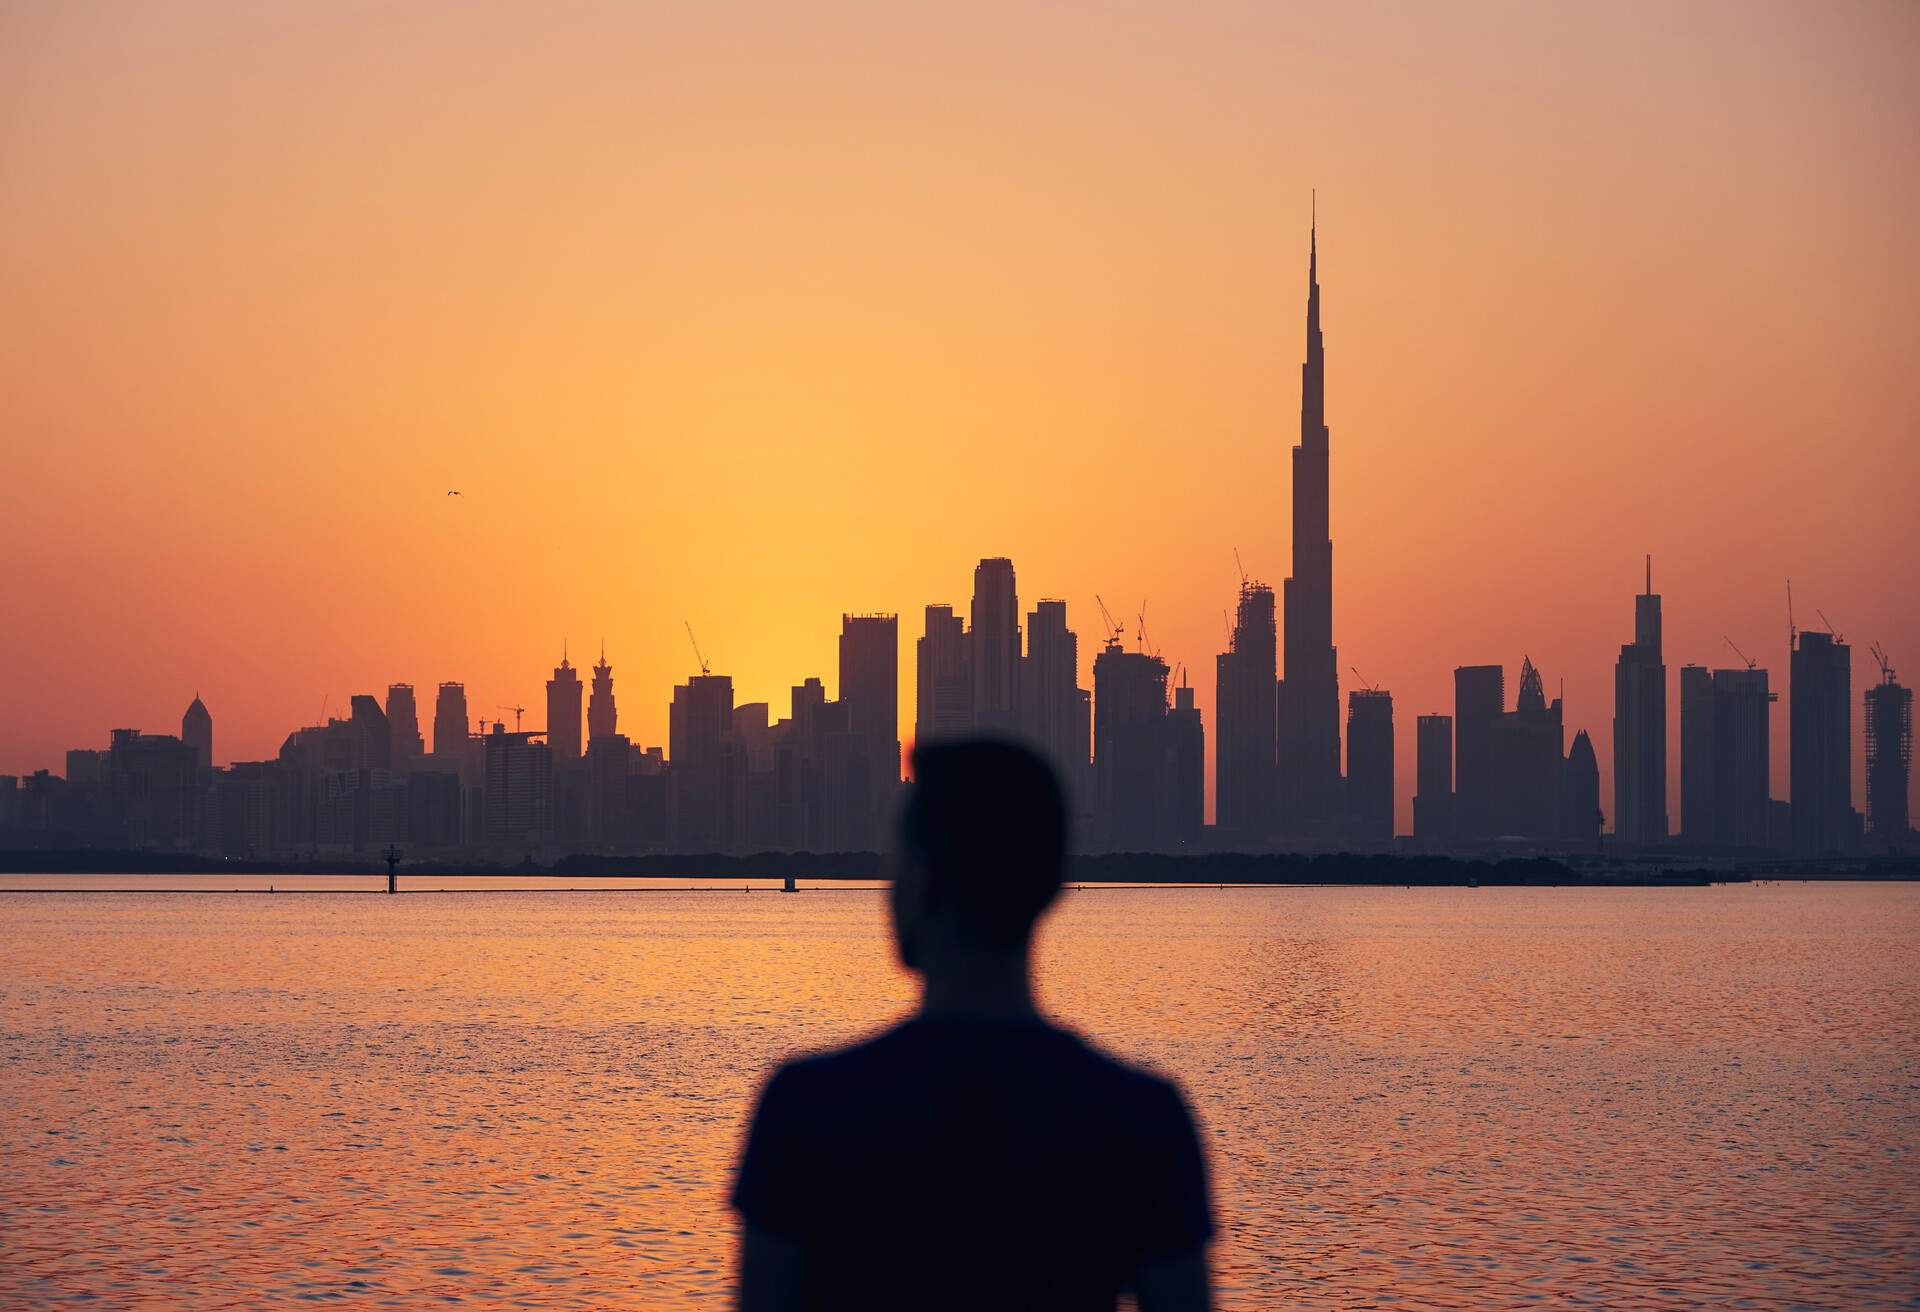 Silhouette of a person looking at the cityscape by the sea with modern skyscrapers against the scenic twilight sky.